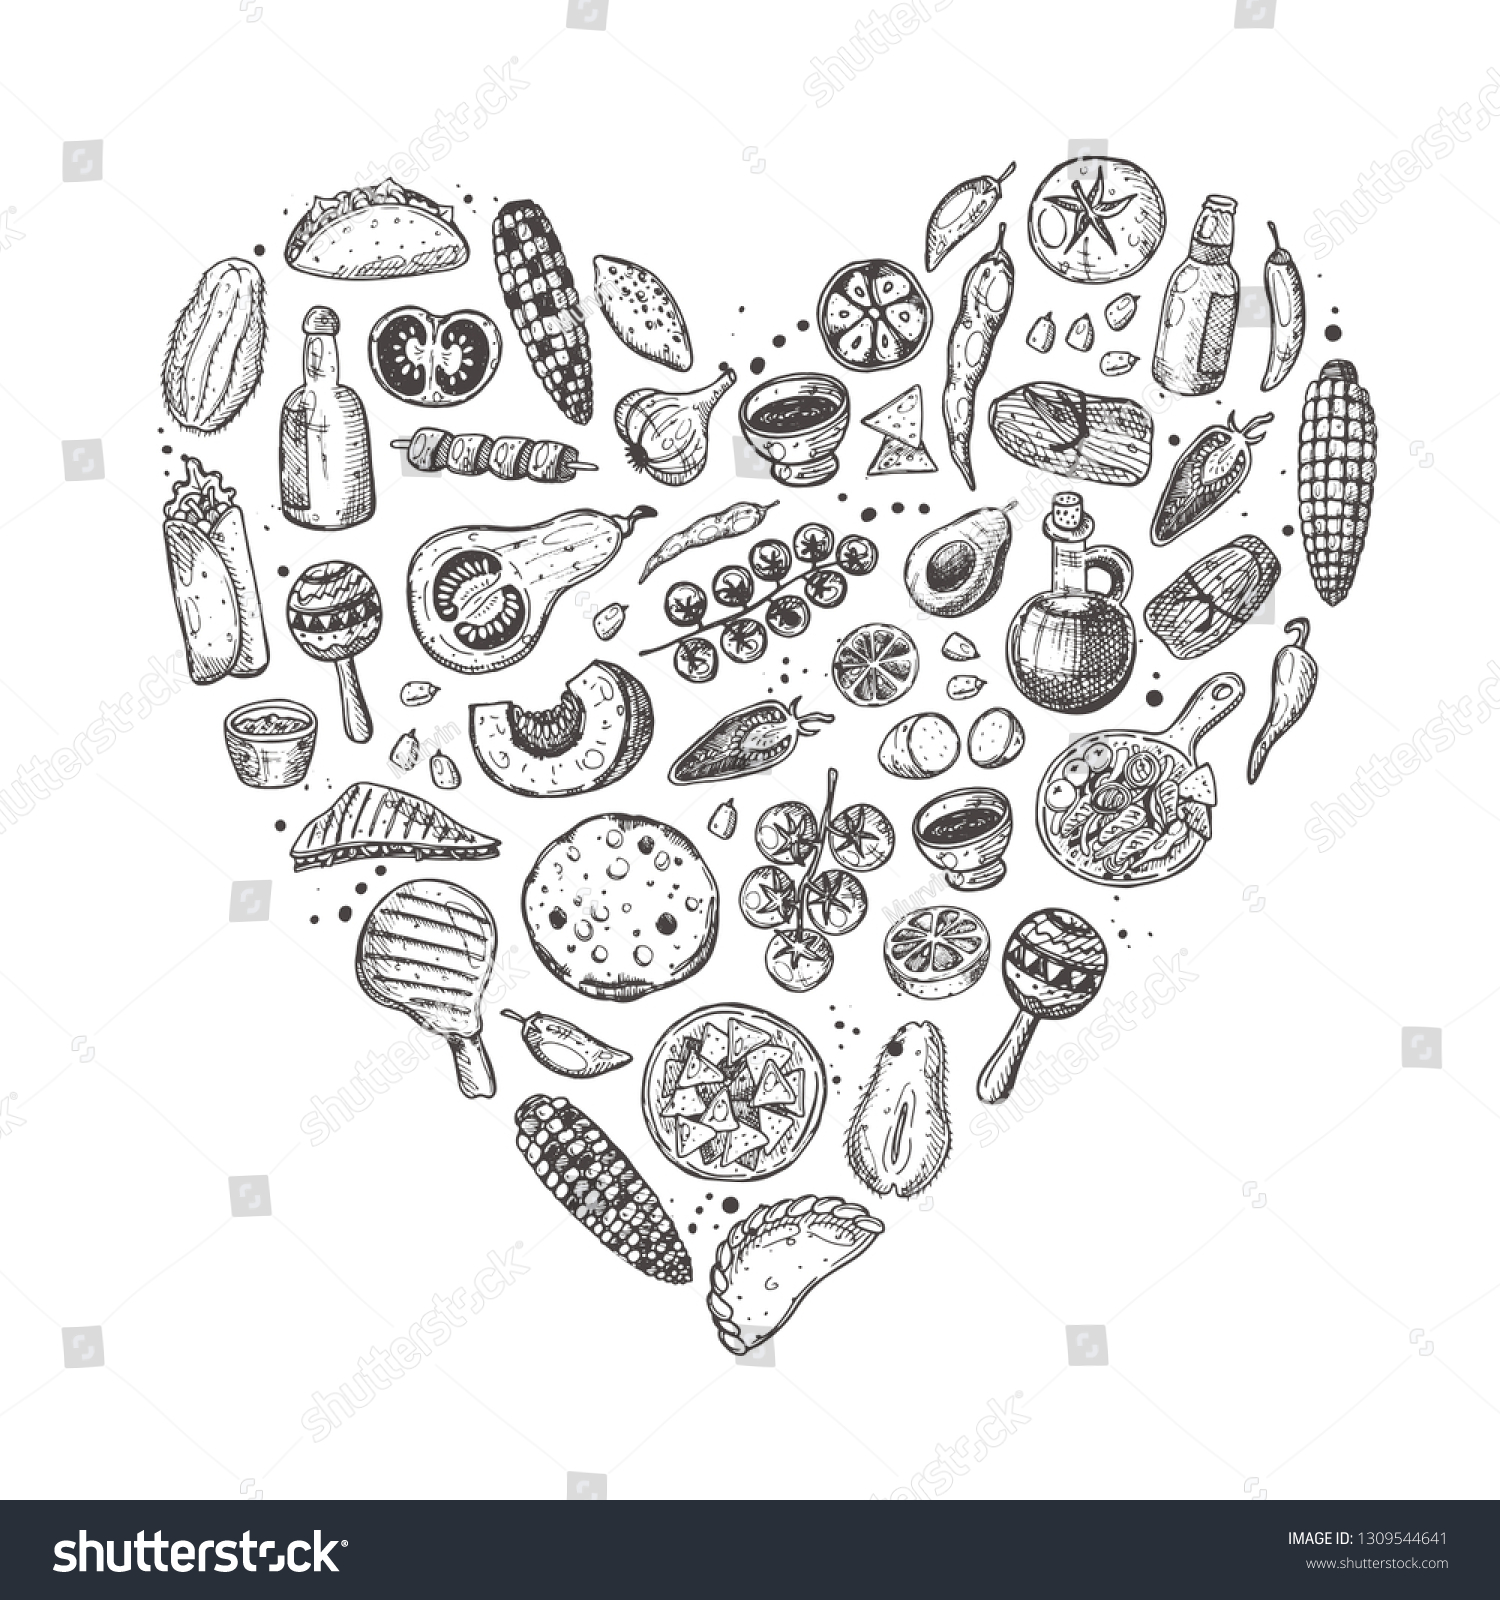 SVG of Mexican food in the shape of a heart. National cuisine. Hot and tasty. Hand drawn vector illustration. Can be used for cafe, market, shop, barbeque, bar, restaurant, poster, label, sticker, logo svg